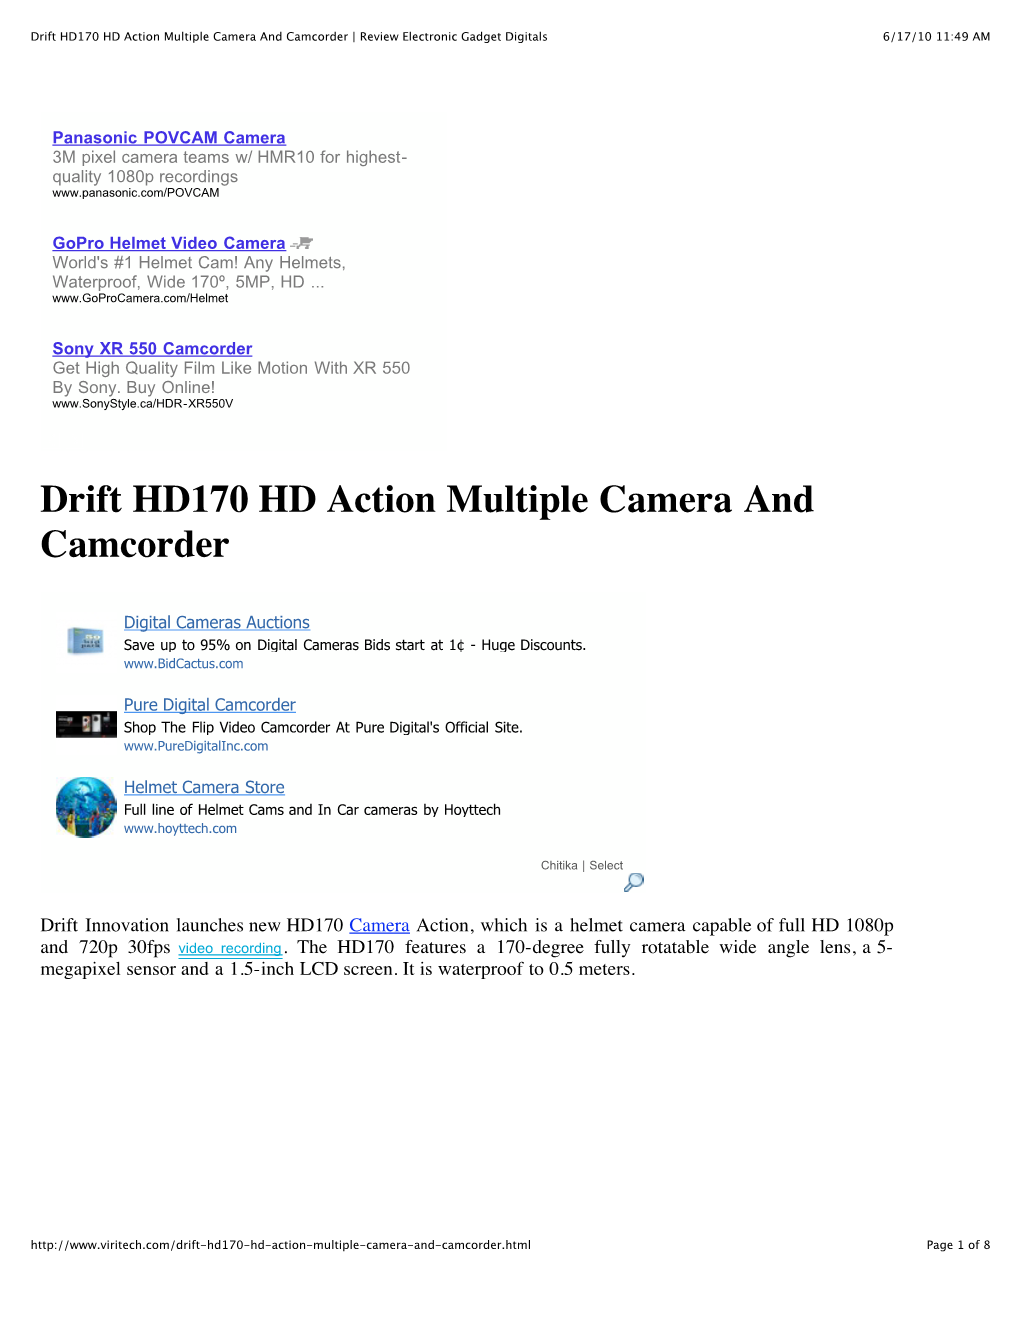 Drift HD170 HD Action Multiple Camera and Camcorder | Review Electronic Gadget Digitals 6/17/10 11:49 AM